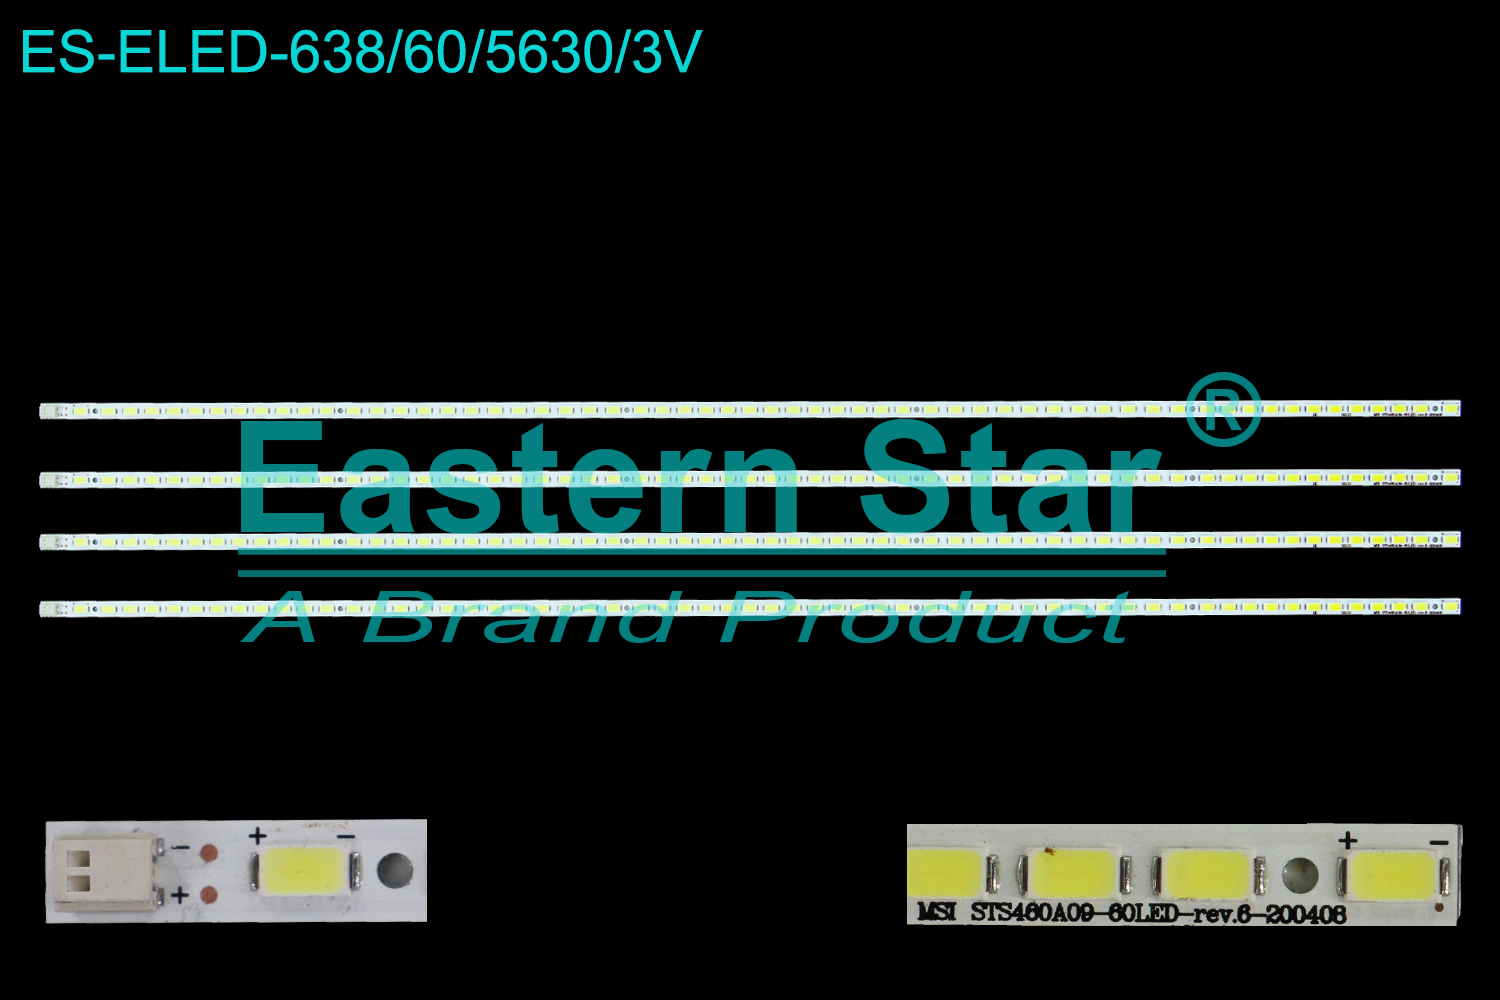 ES-ELED-638 ELED/EDGE TV backlight use for 46'' Sony KLV-46EX600 STS460A09-60LED-rev.6-200406  LED STRIPS(4)